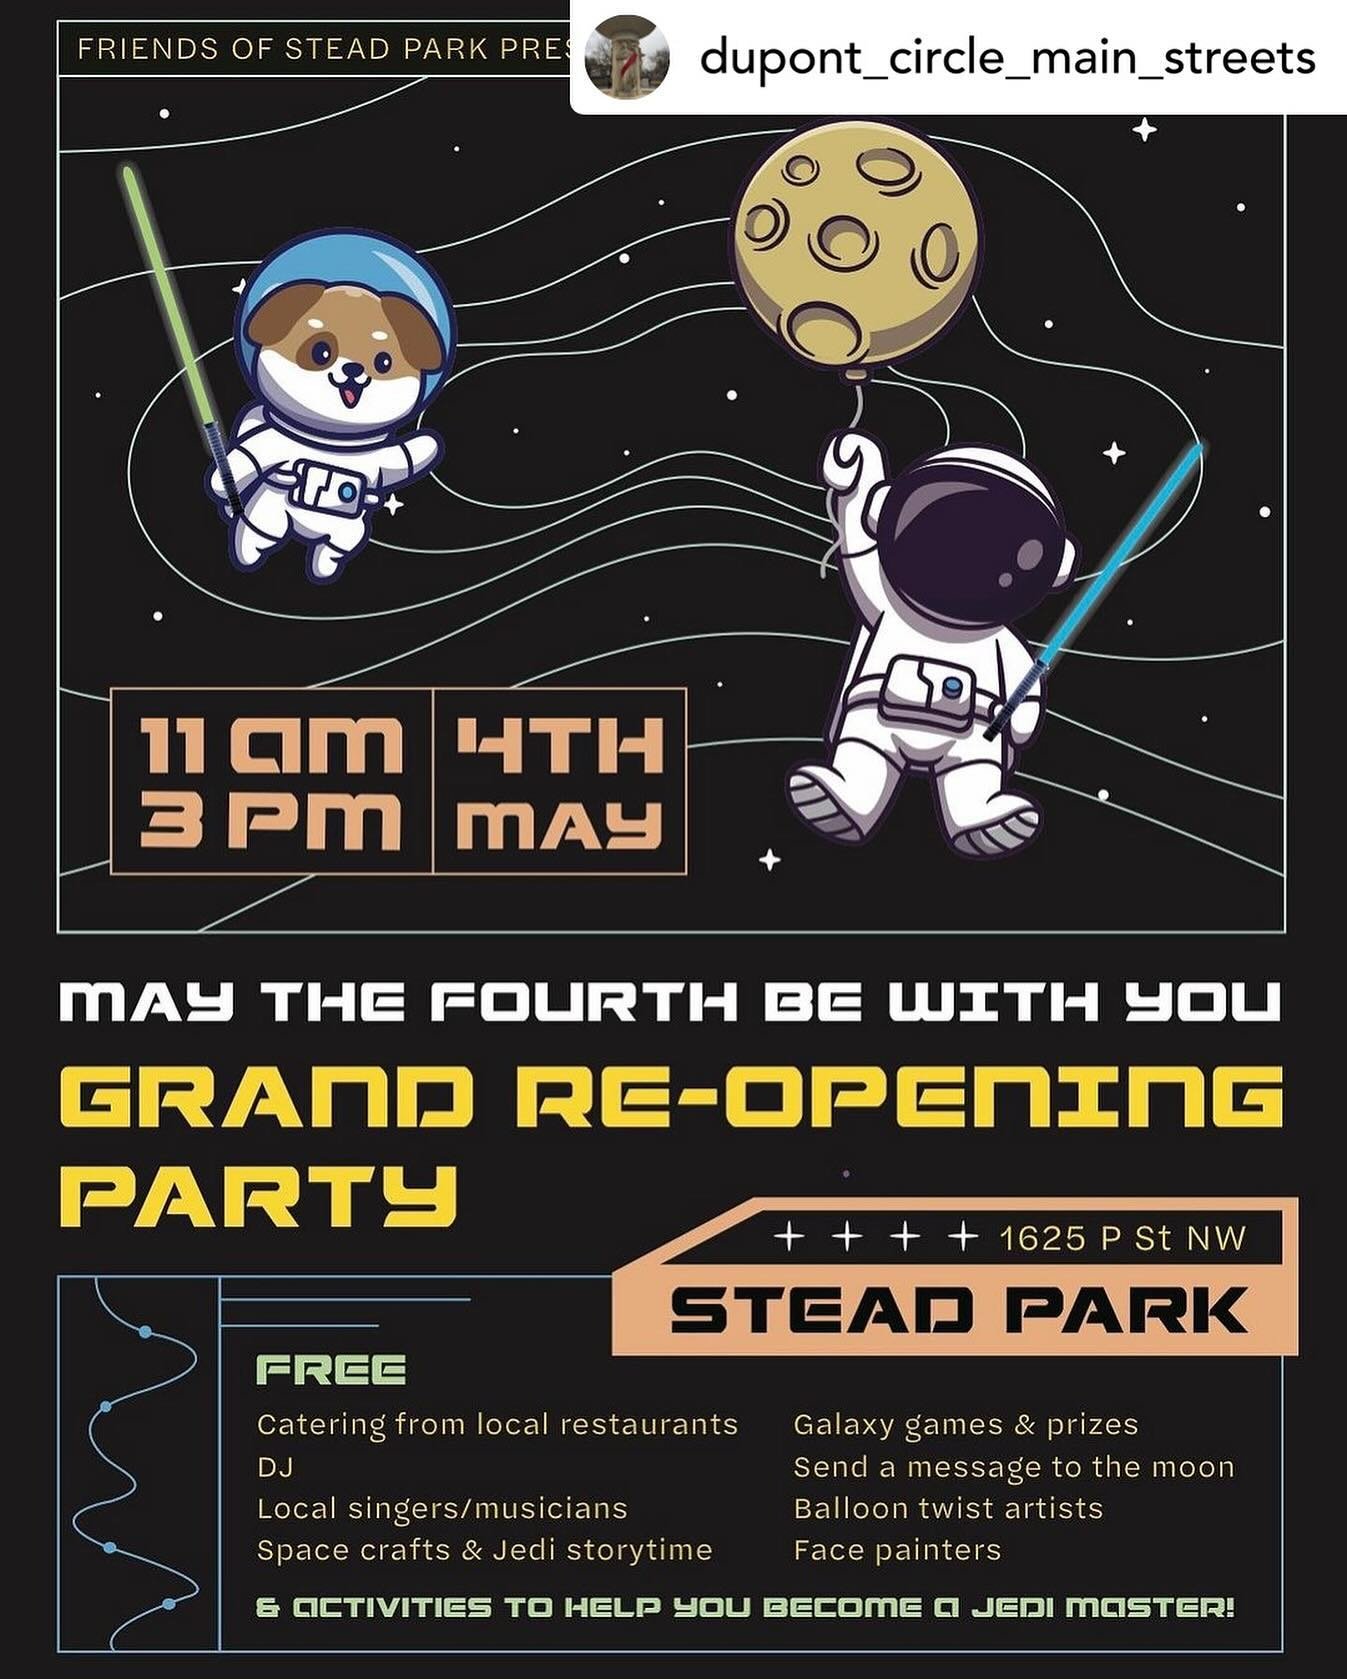 Posted @withregram &bull; @dupont_circle_main_streets In case you haven&rsquo;t heard, Stead Park is having a party that will be &lsquo;out of this world&rsquo;!!

May 4th &bull; 11:00am - 3:00pm
📍1625 P st. NW

Event details: 
This is a Star Wars-t